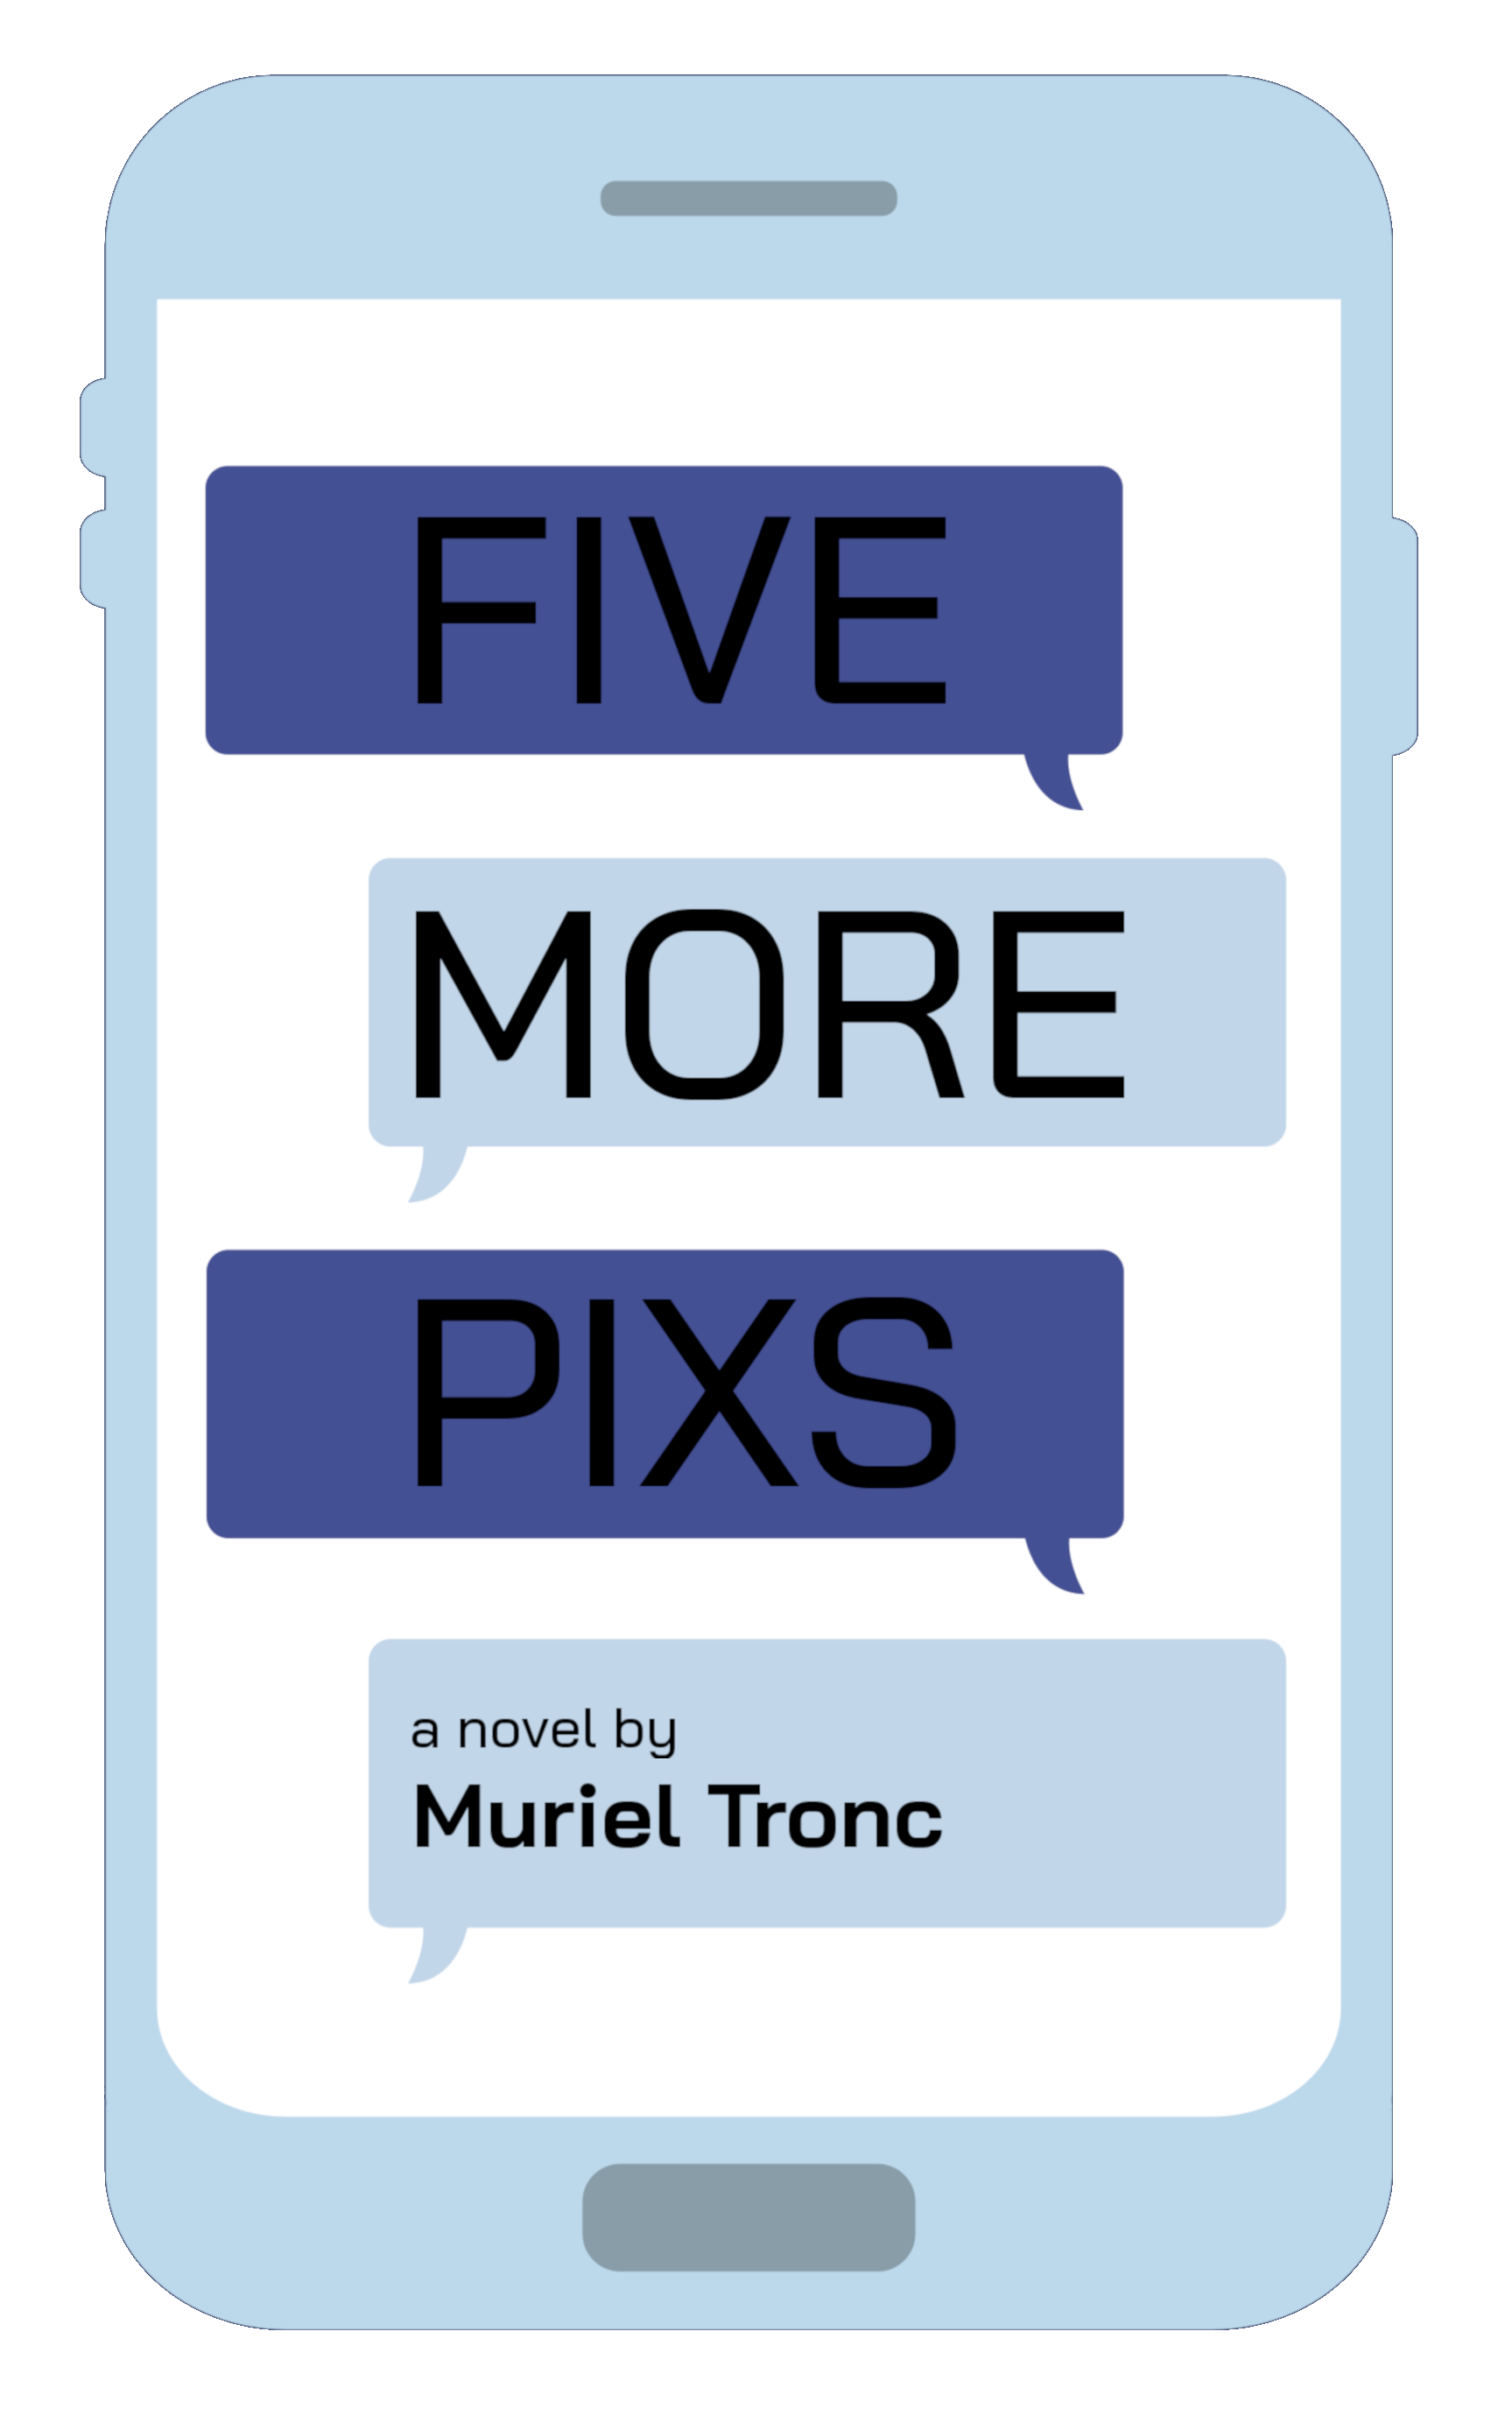 Book cover for Five More Pixs, by Muriel Tronc